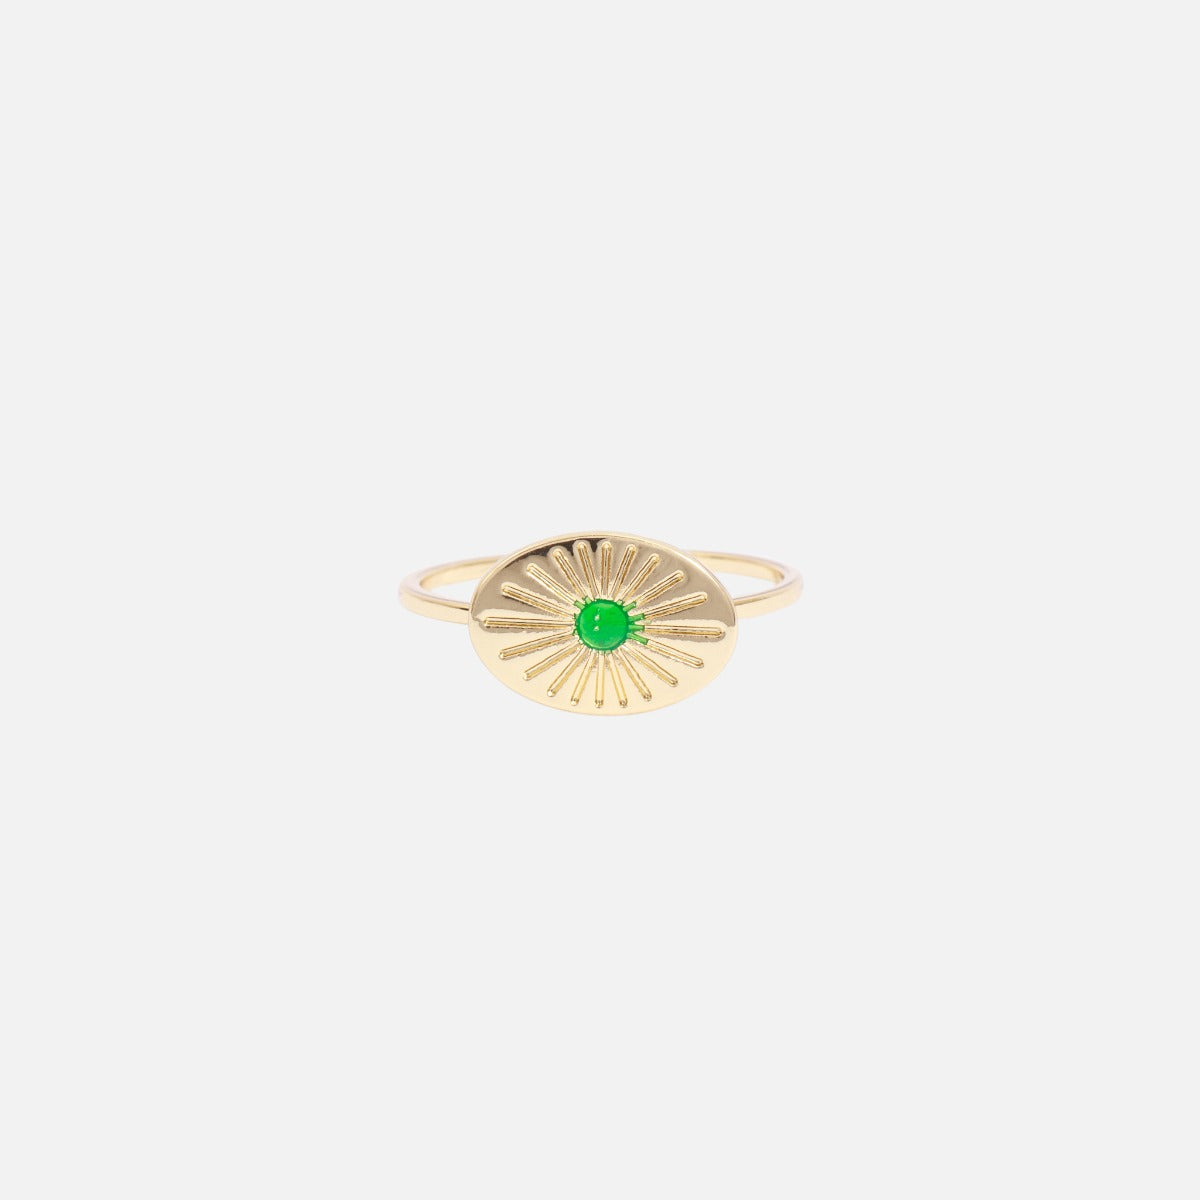 Set of five golden and green rings